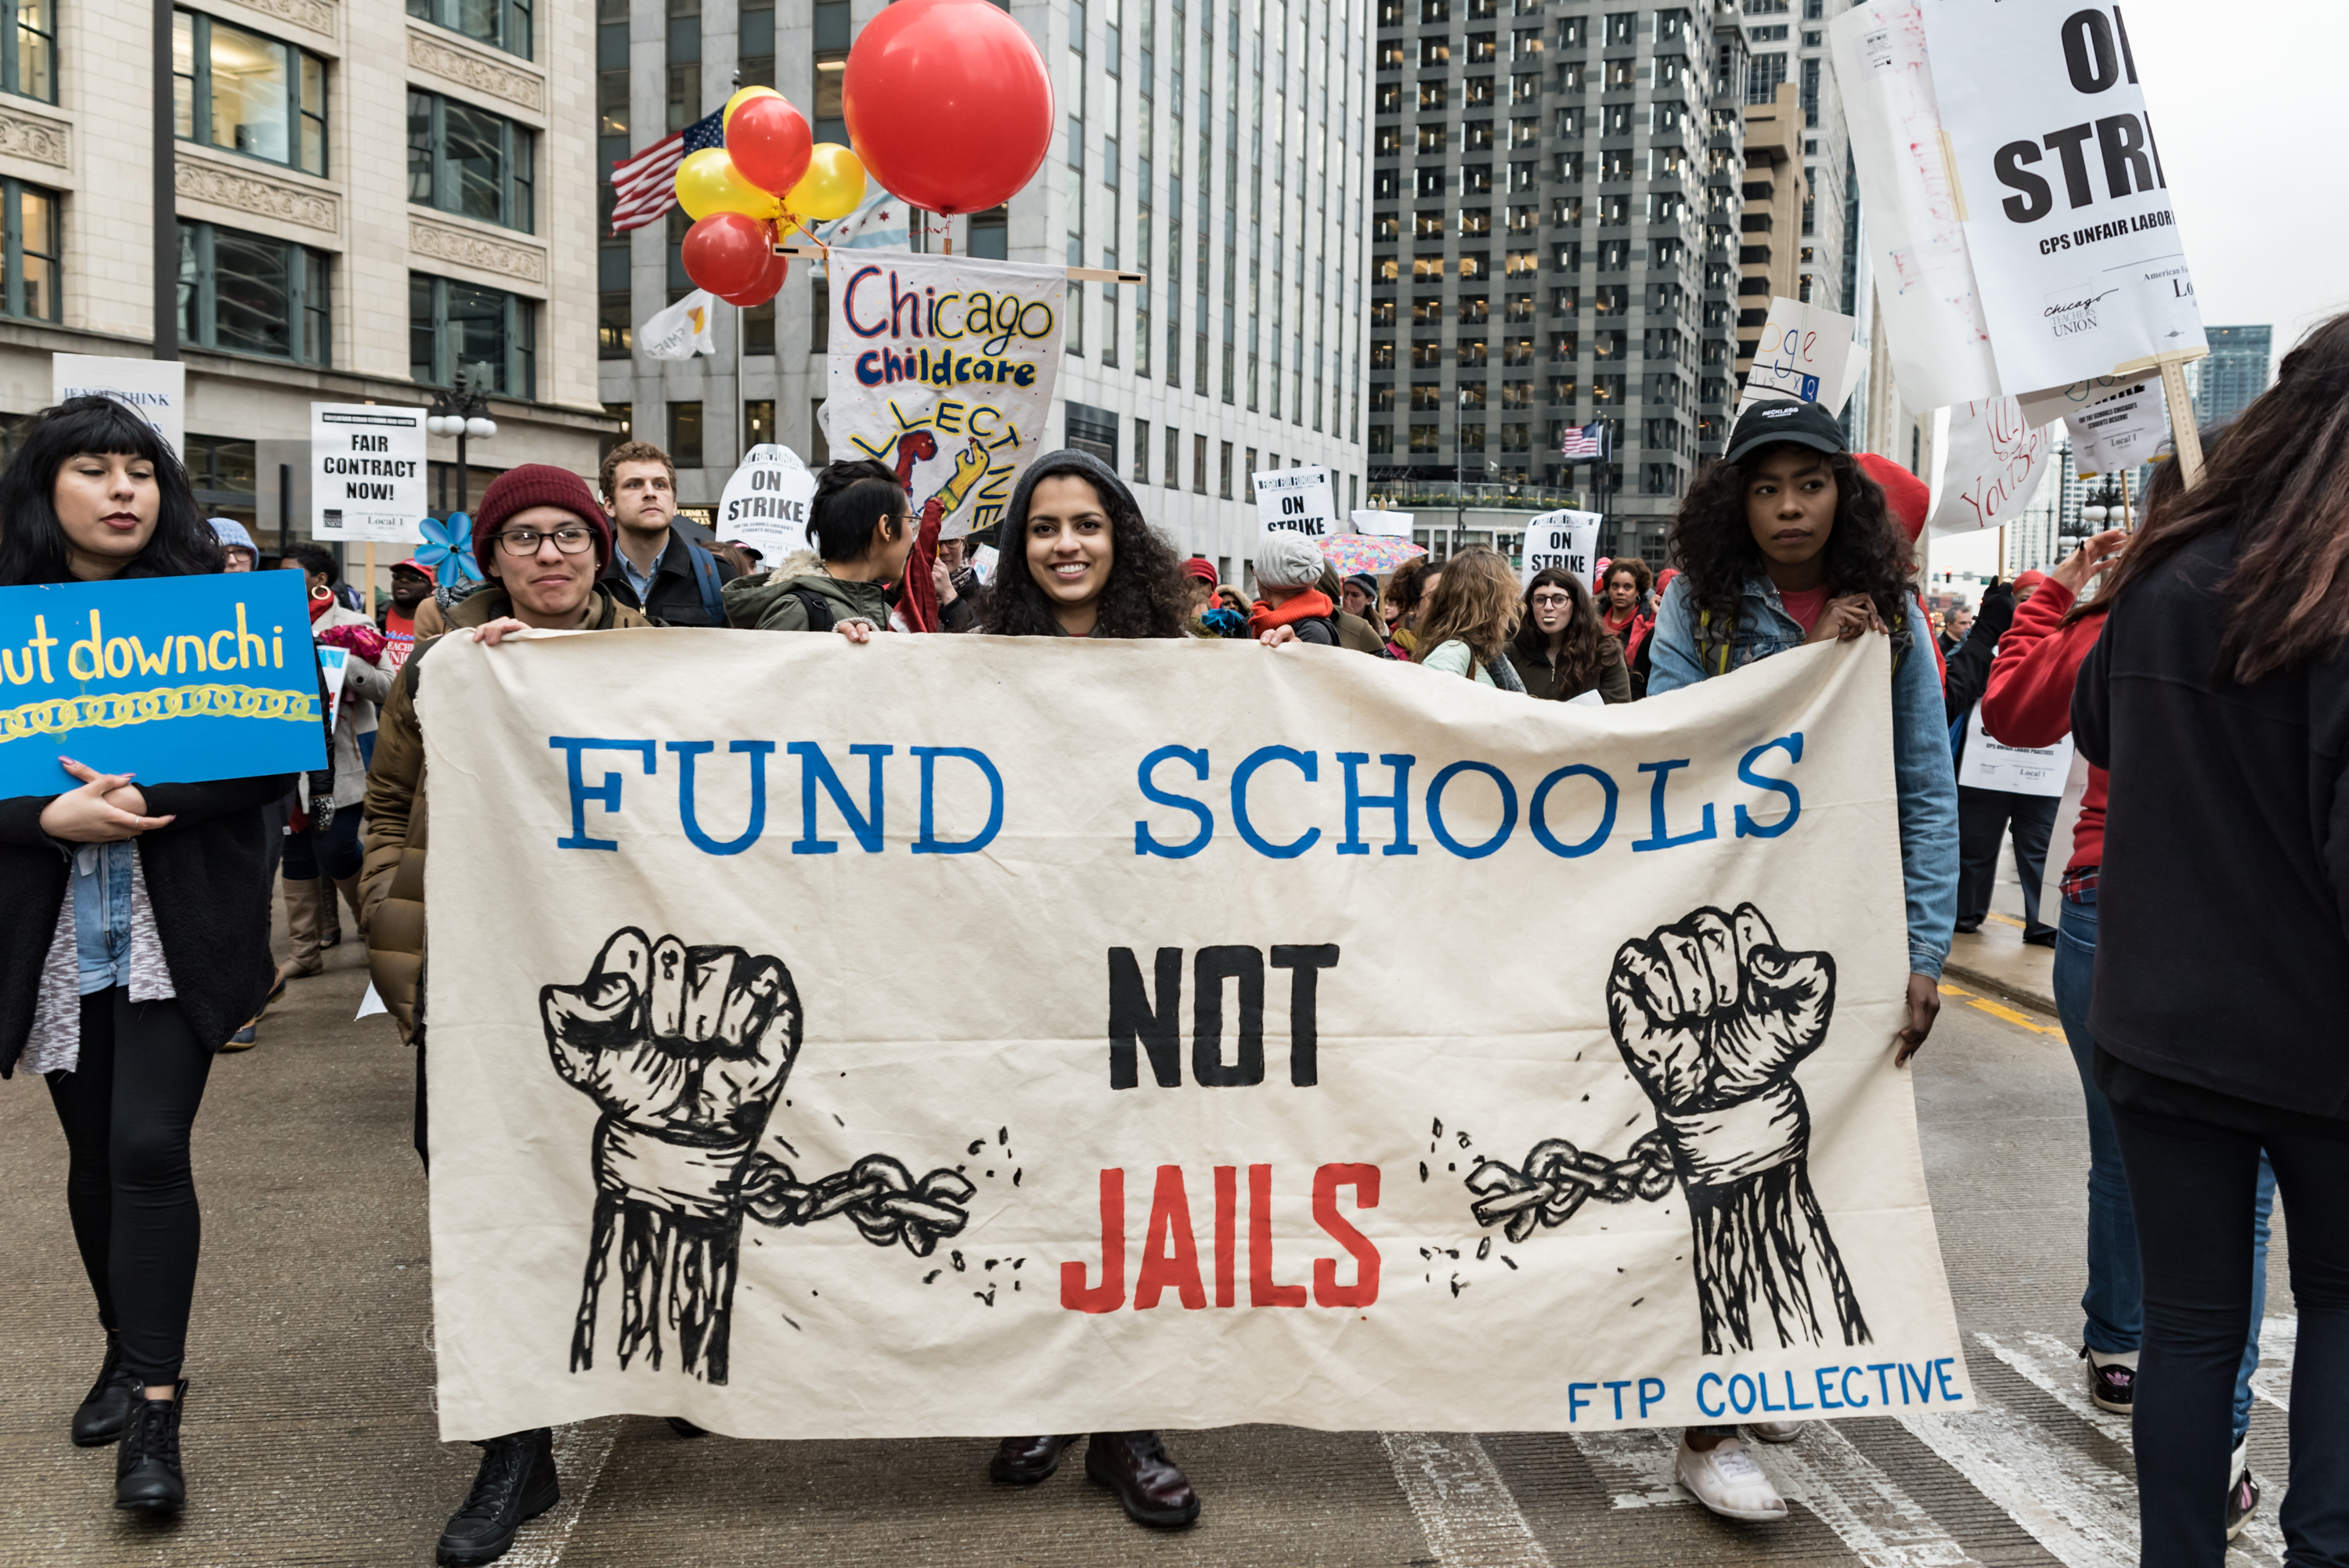 Image: Photo of a group of people rallying in downtown Chicago. In the center of the image are three people of color holding up a sign which says: “Fund Schools Not Jails” in the center. On either side of the words are images of painted fists with broken shackles around the wrists. On the bottom right of the poster is “FTP Collective.” Photo taken April 2016 at the Shut Down the Chi Rally. Photo courtesy of the artist.